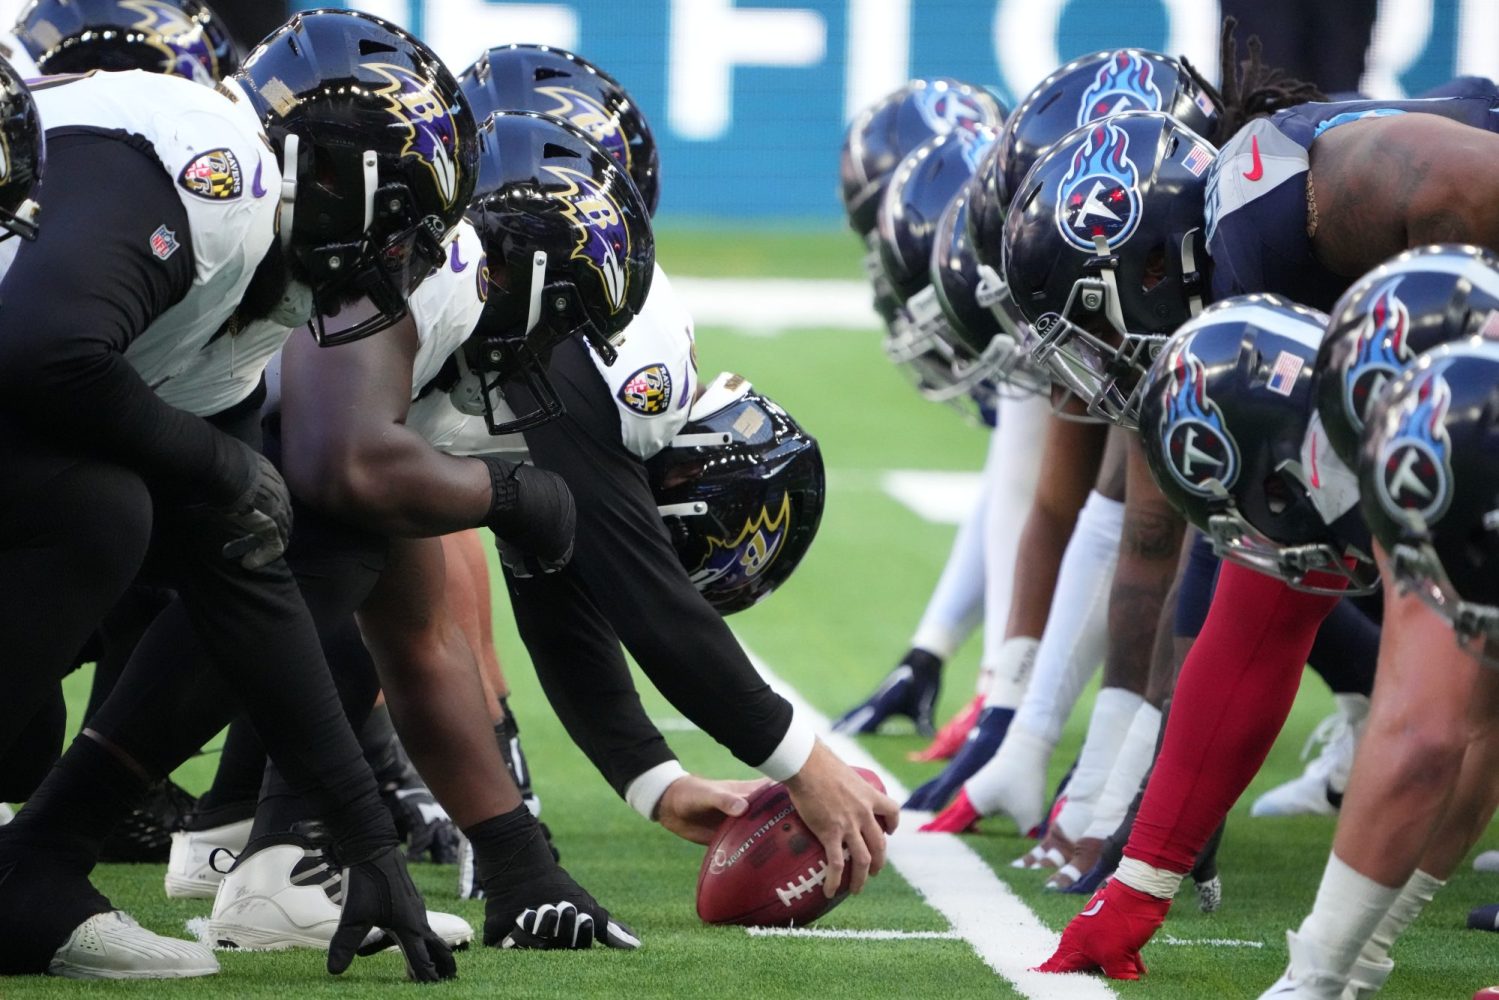 A general overall view of the line of helmets at the line of scrimmage as Baltimore Ravens long snapper Tyler Ott snaps the ball against the Tennessee Titans in the first half during an NFL International Series game at Tottenham Hotspur Stadium.